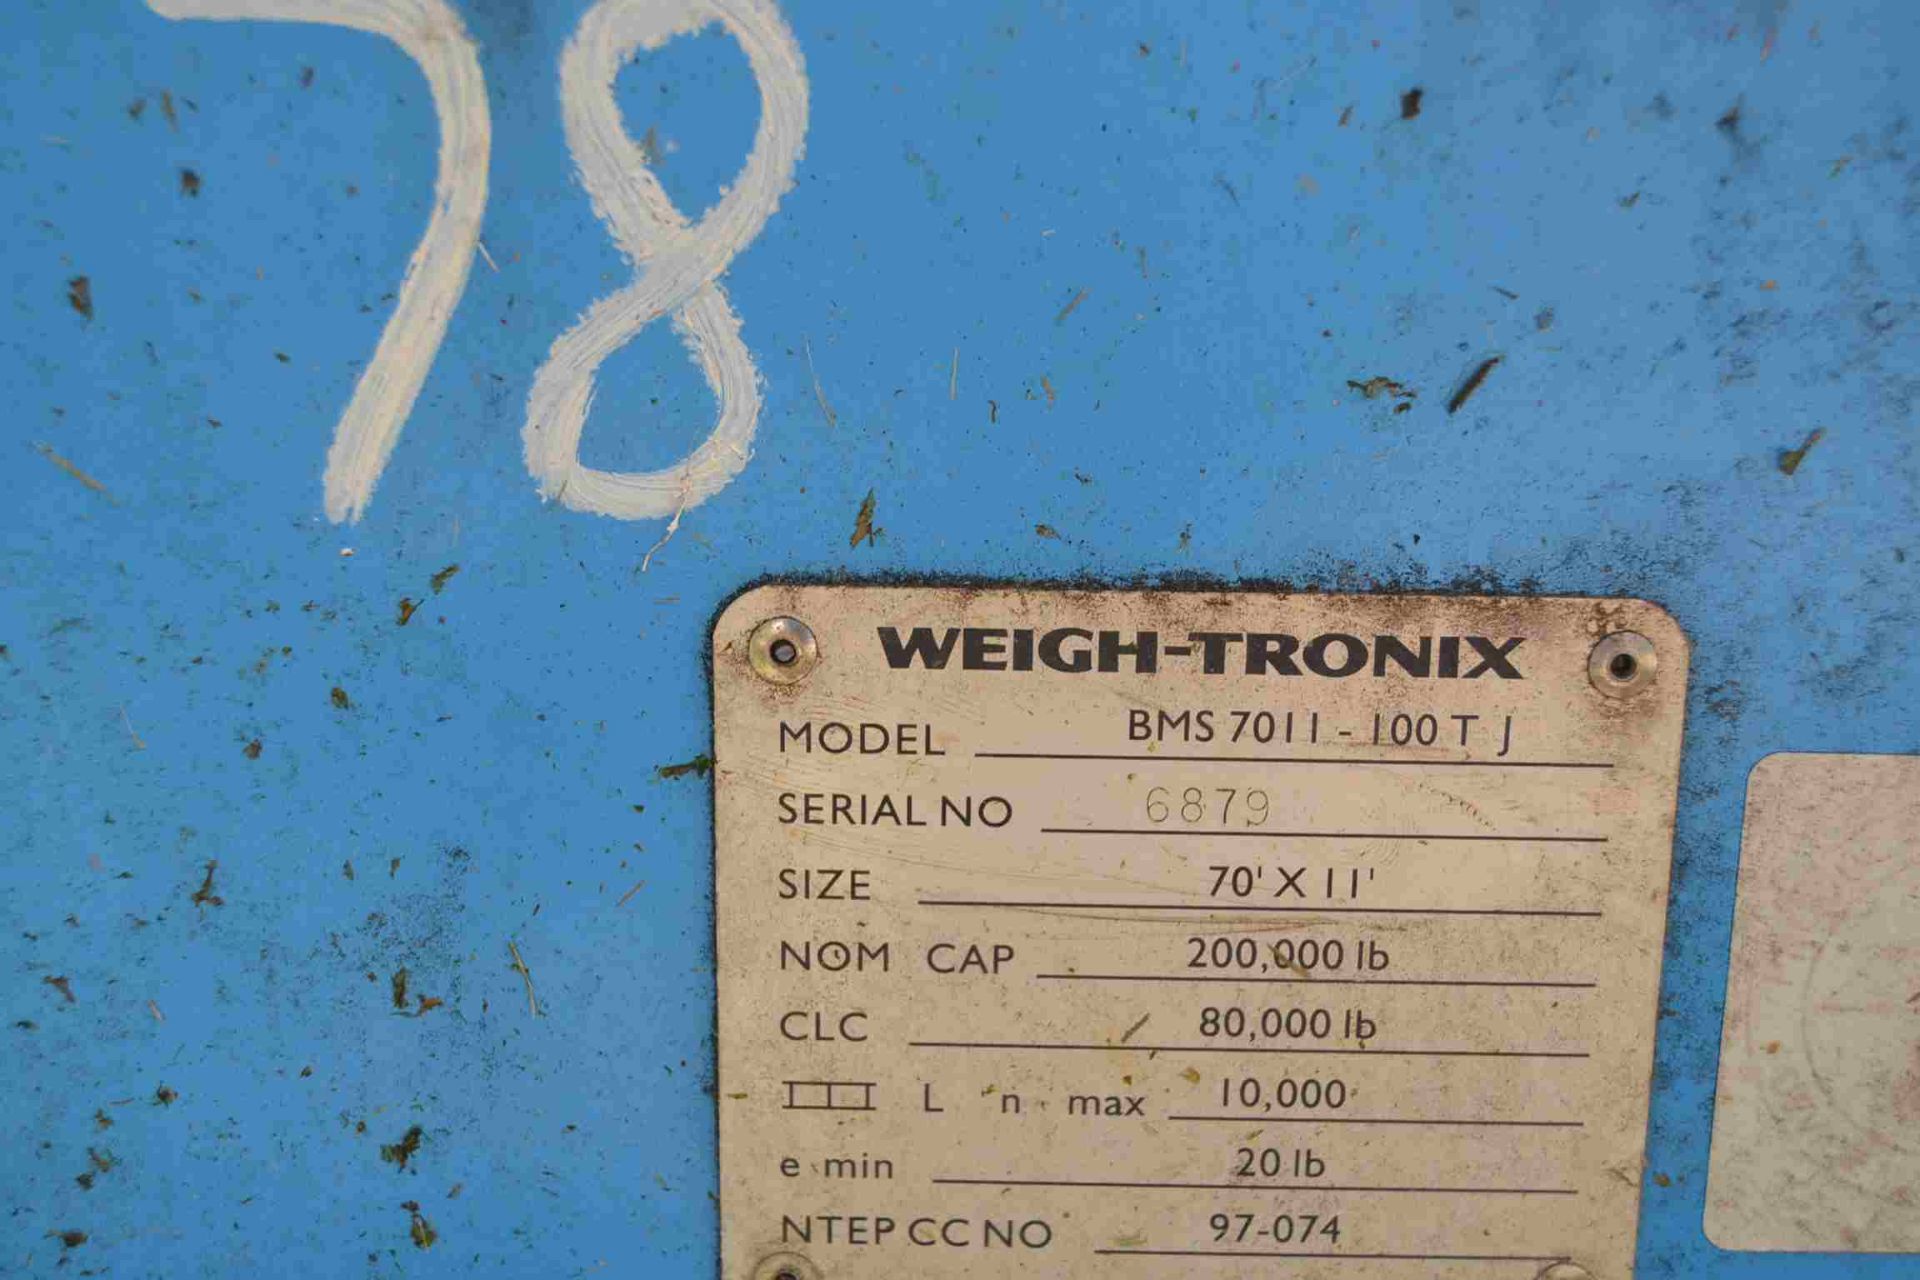 WEIGH TRONIX 120,000 LB 11'X70' STEEL ABOVE GROUND SCALE W/ PRINT OUT SN#6879 LOCATED SITE 1 - Image 5 of 6